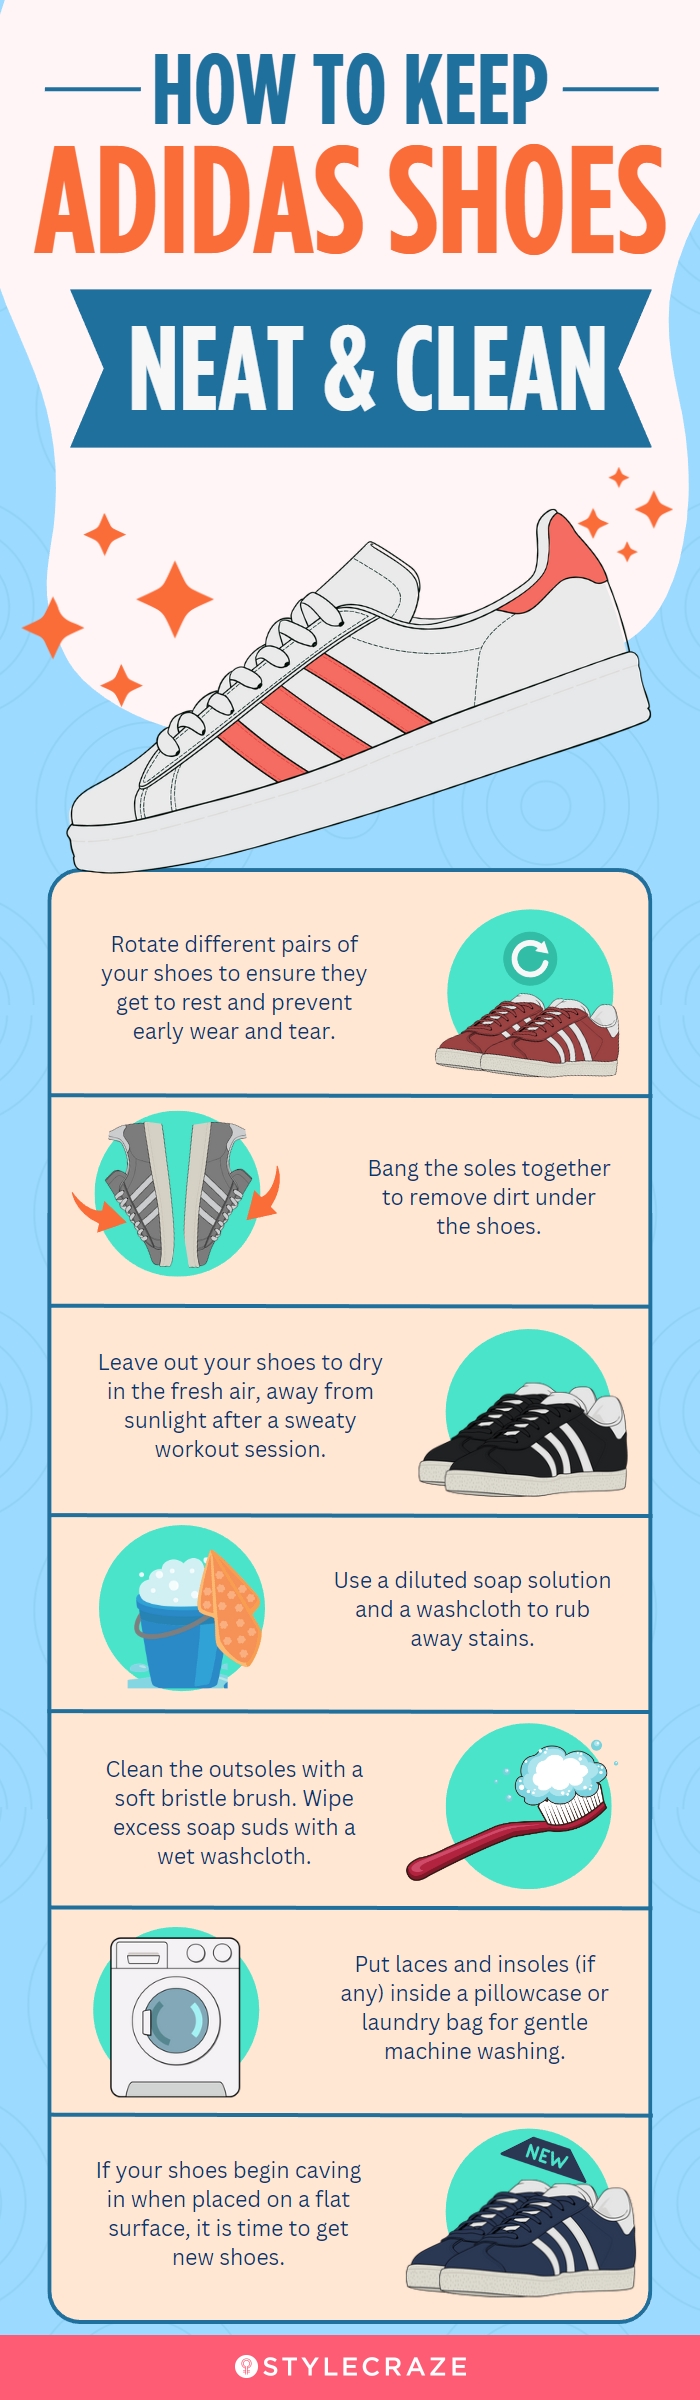 How To Keep Adidas Shoes Neat & Clean (infographic)